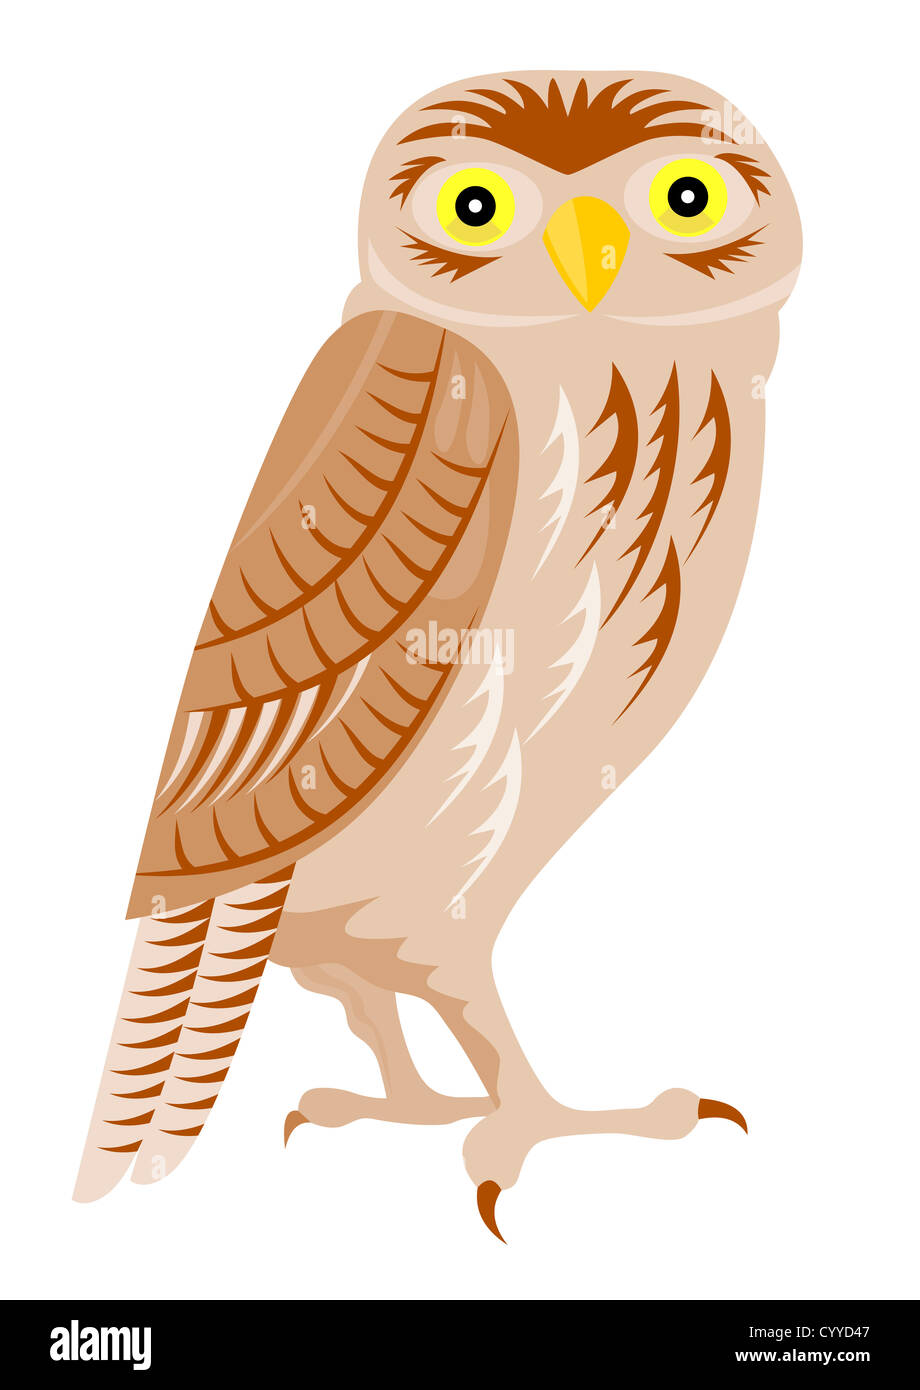 Illustration of an owl done in retro woodcut style. Stock Photo